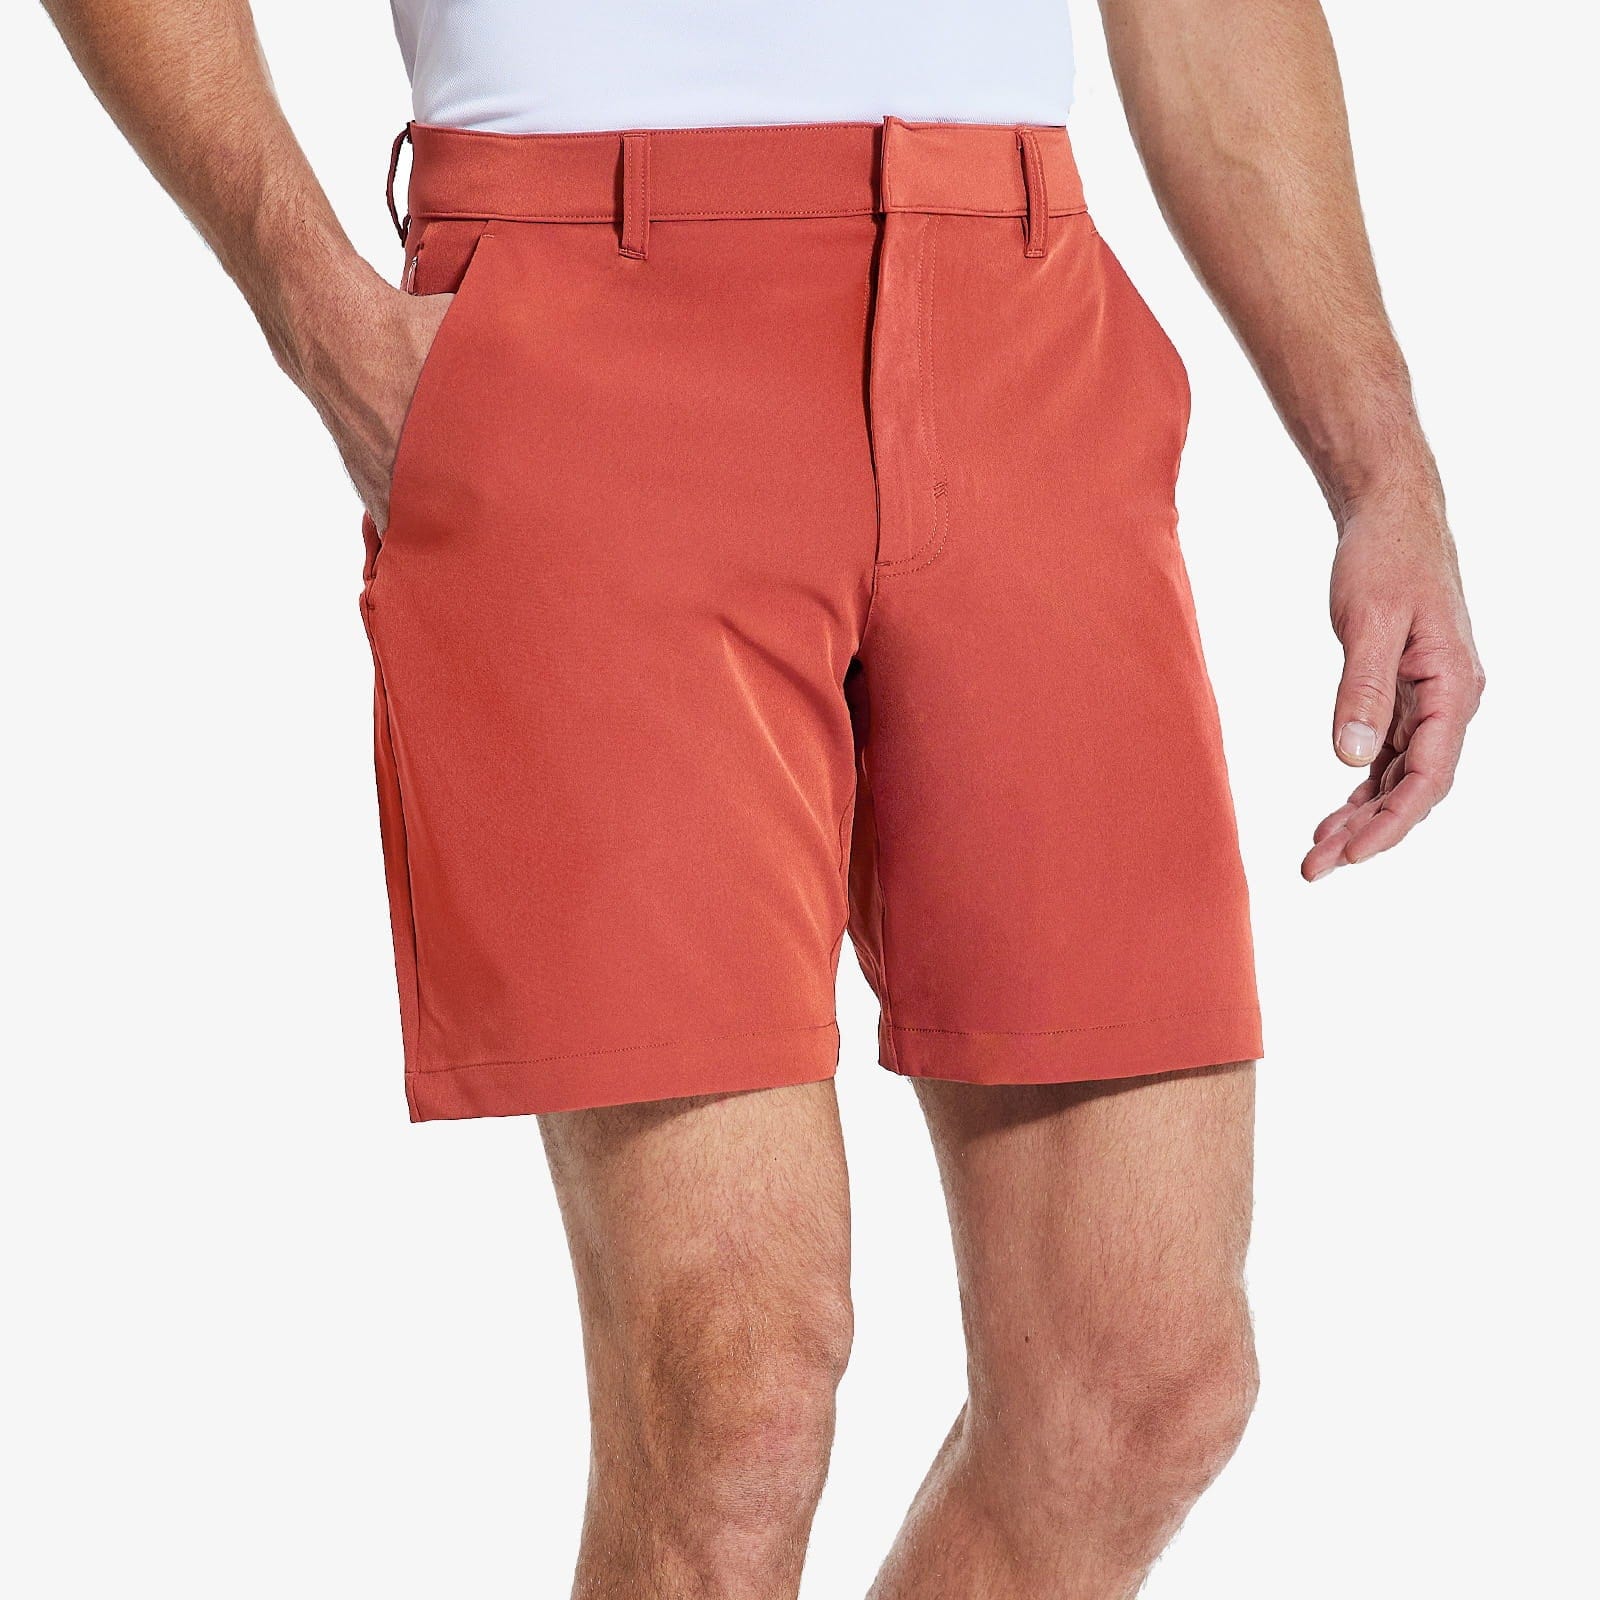 Men's Stretch Golf Shorts 5 Pockets 8 Quick Dry Shorts - Red / S